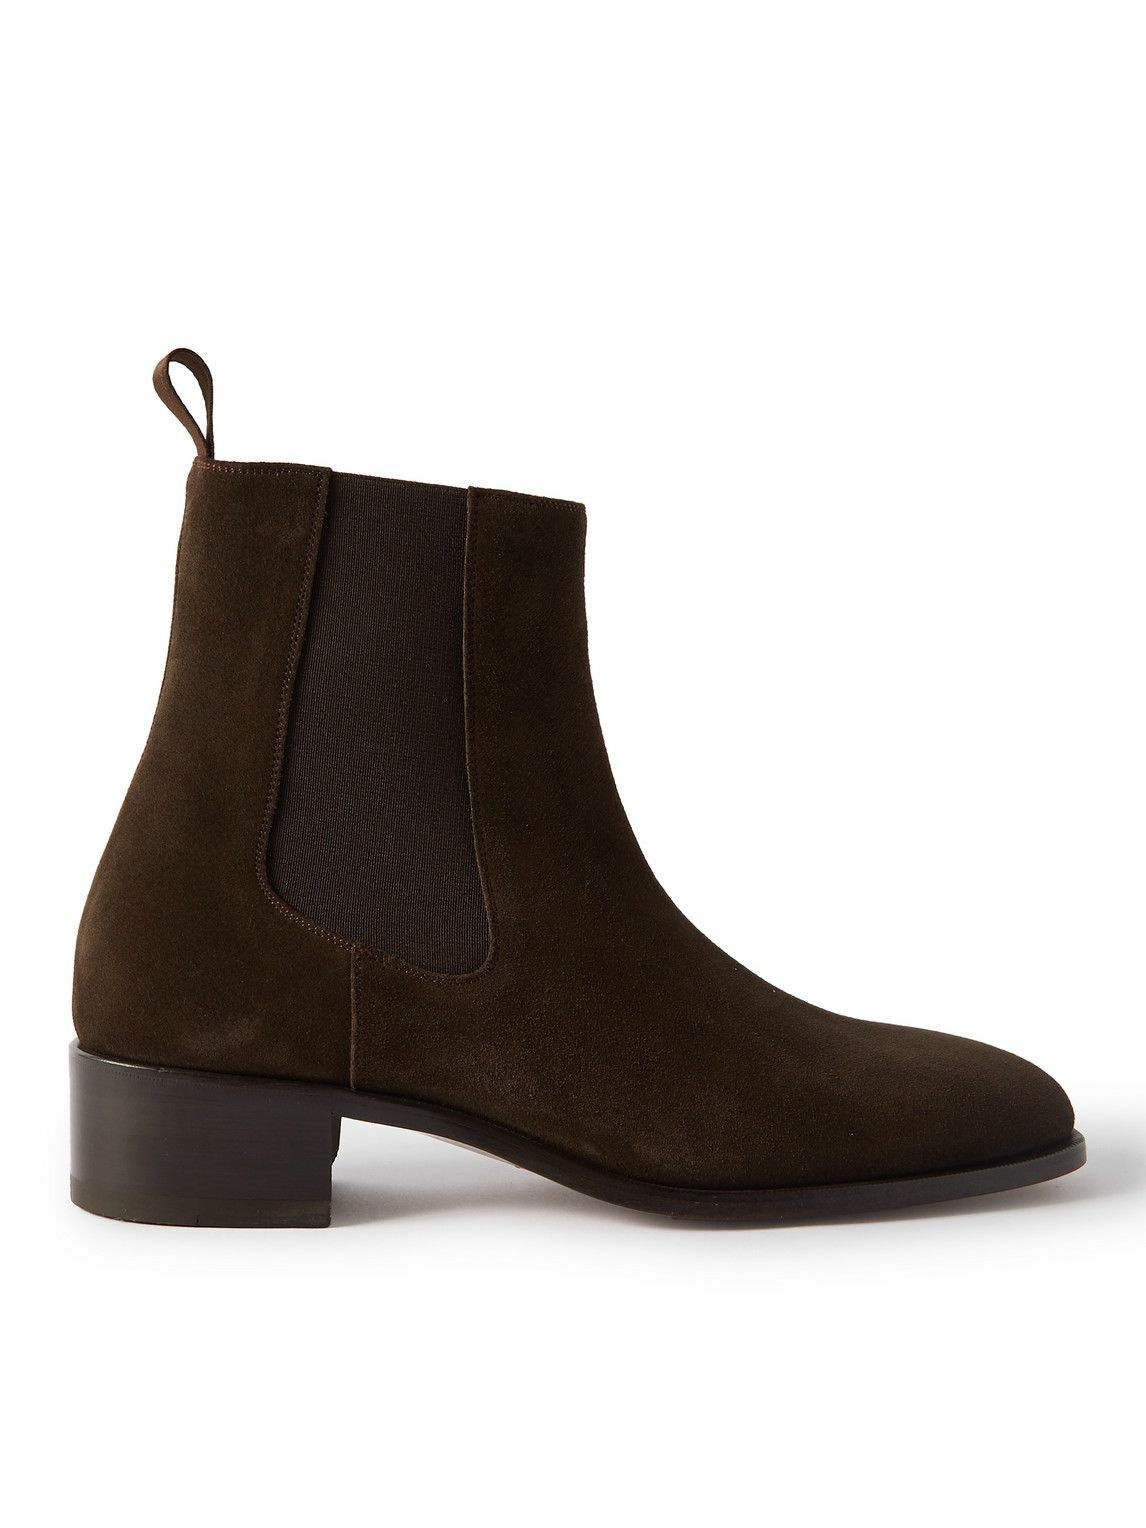 TOM FORD - Alec Suede Chelsea Boots - Brown TOM FORD